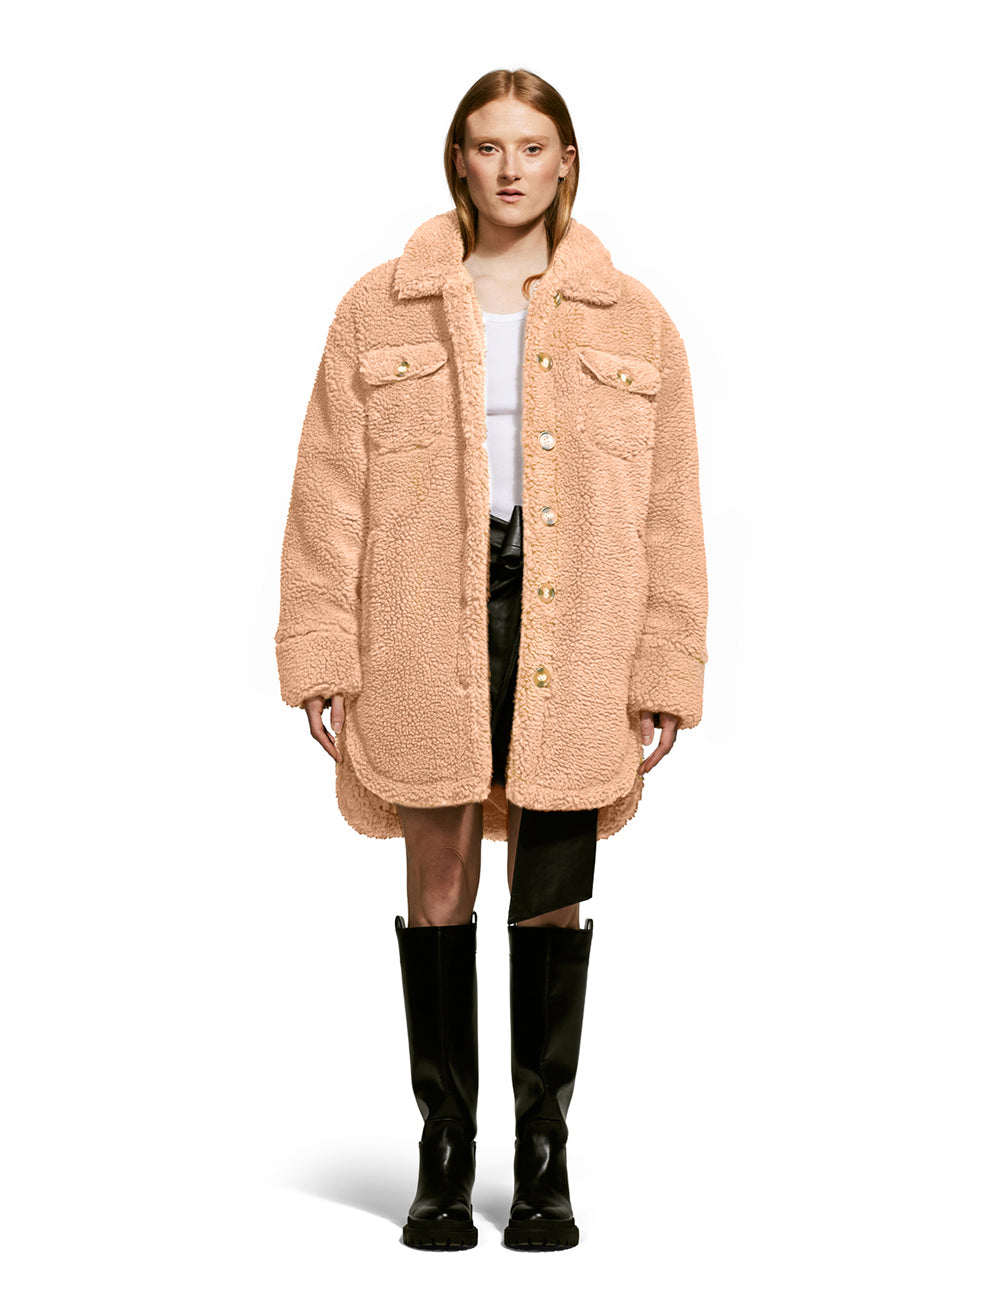 Model wearing the Ash, a teddy-inspired faux-fur sherpa shell with a laid-back silhouette in Camel.